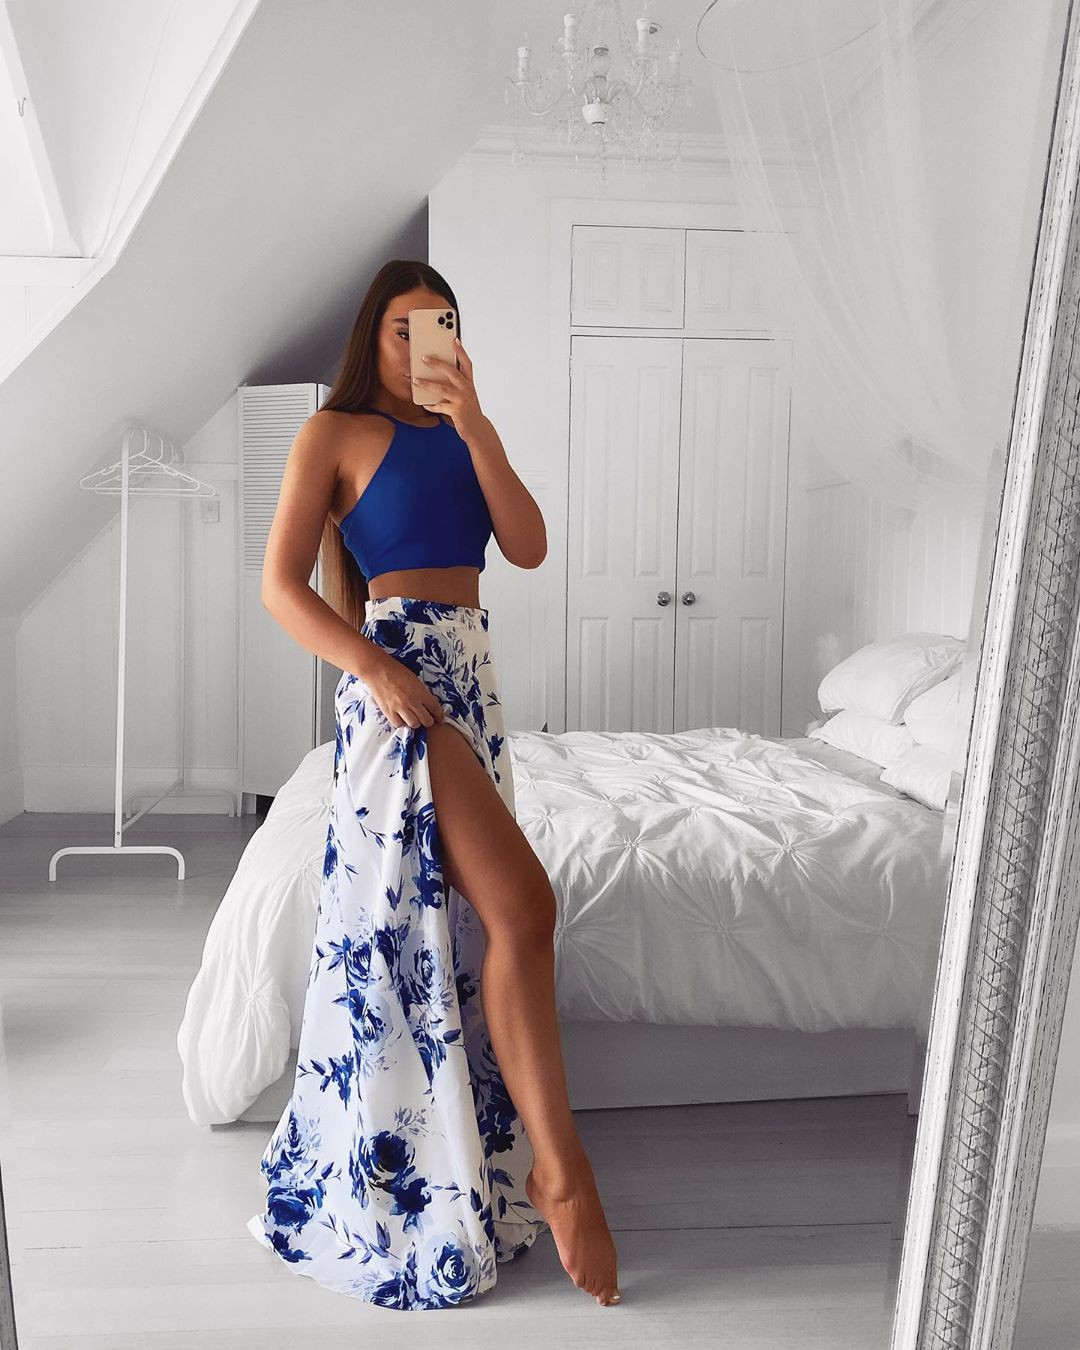 White and blue dress, gown, outfit ideas | Emma Spiliopoulos Instagram